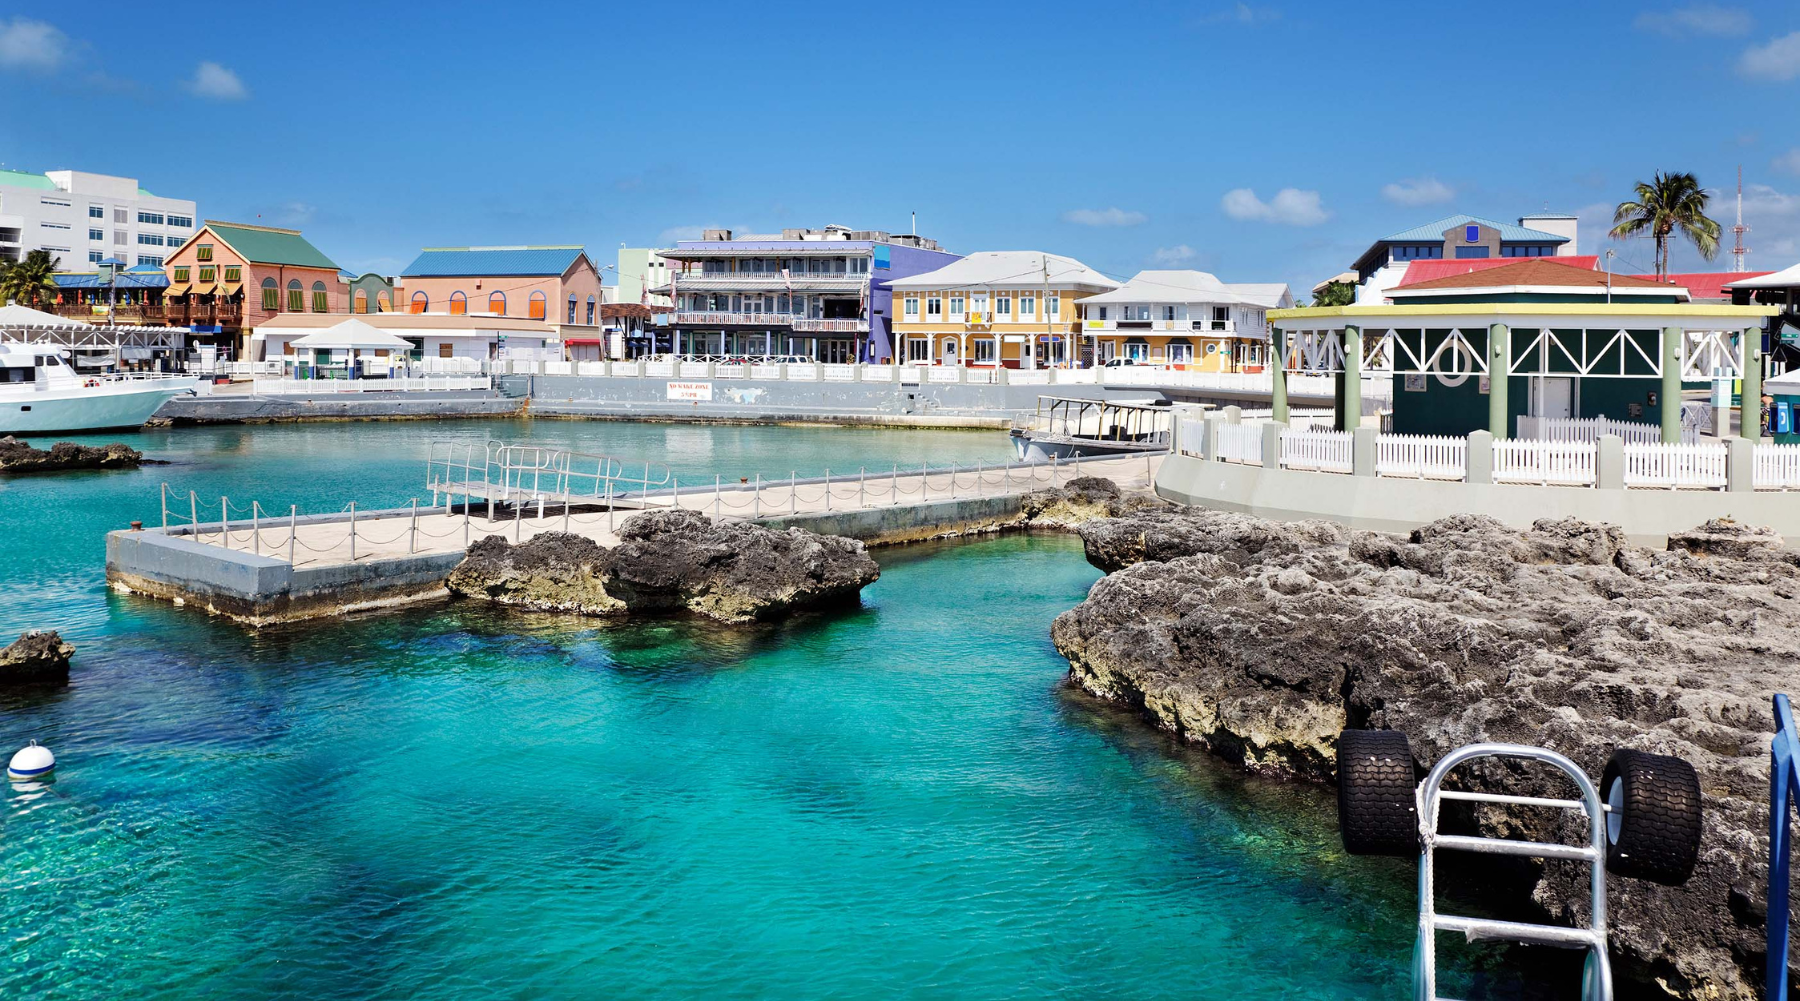 How to move to the Cayman Islands